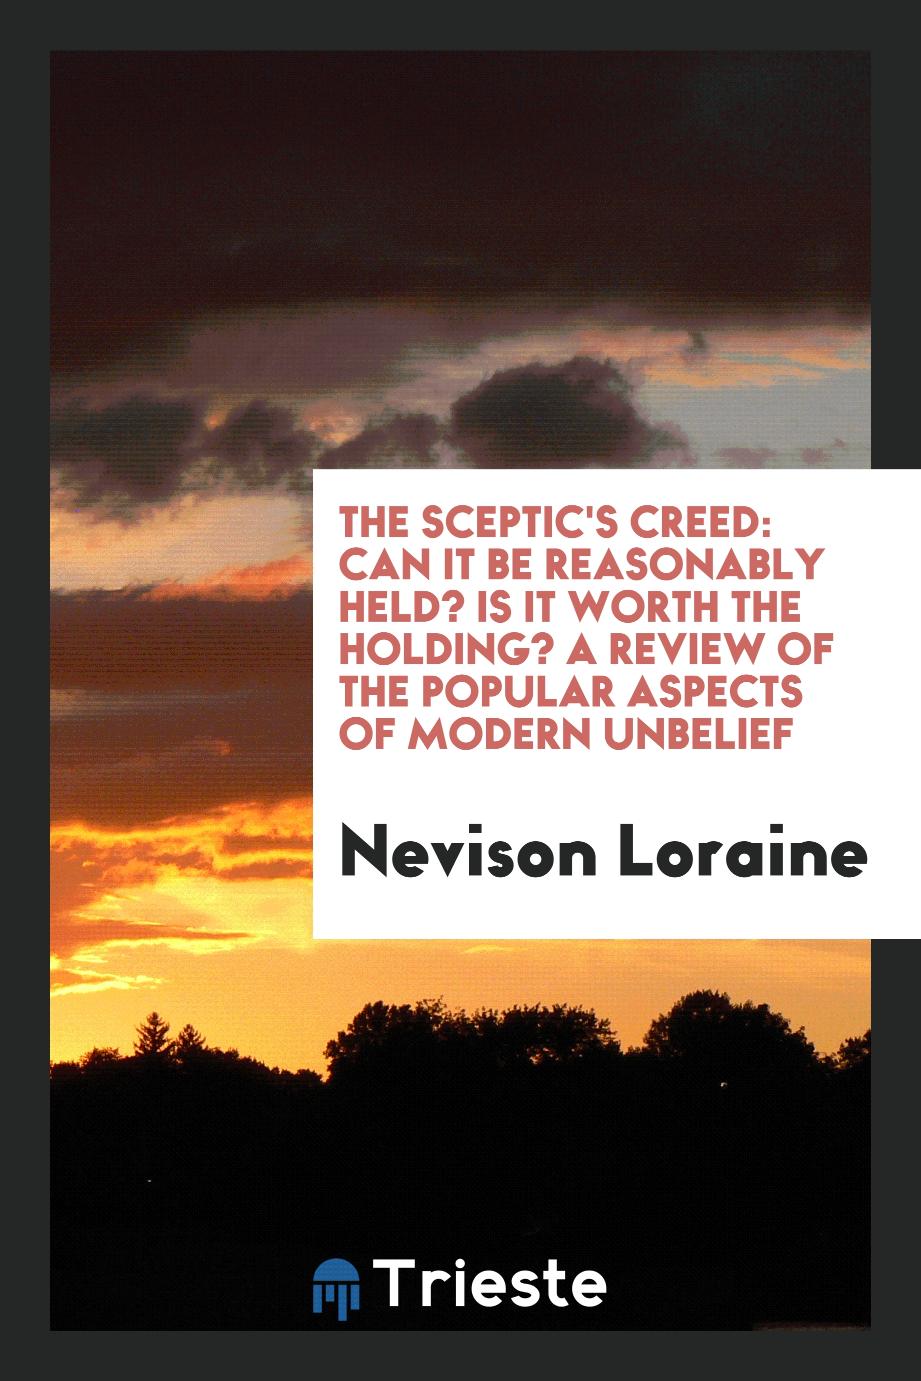 The Sceptic's Creed: Can It Be Reasonably Held? Is It worth the Holding? A Review of the Popular Aspects of Modern Unbelief